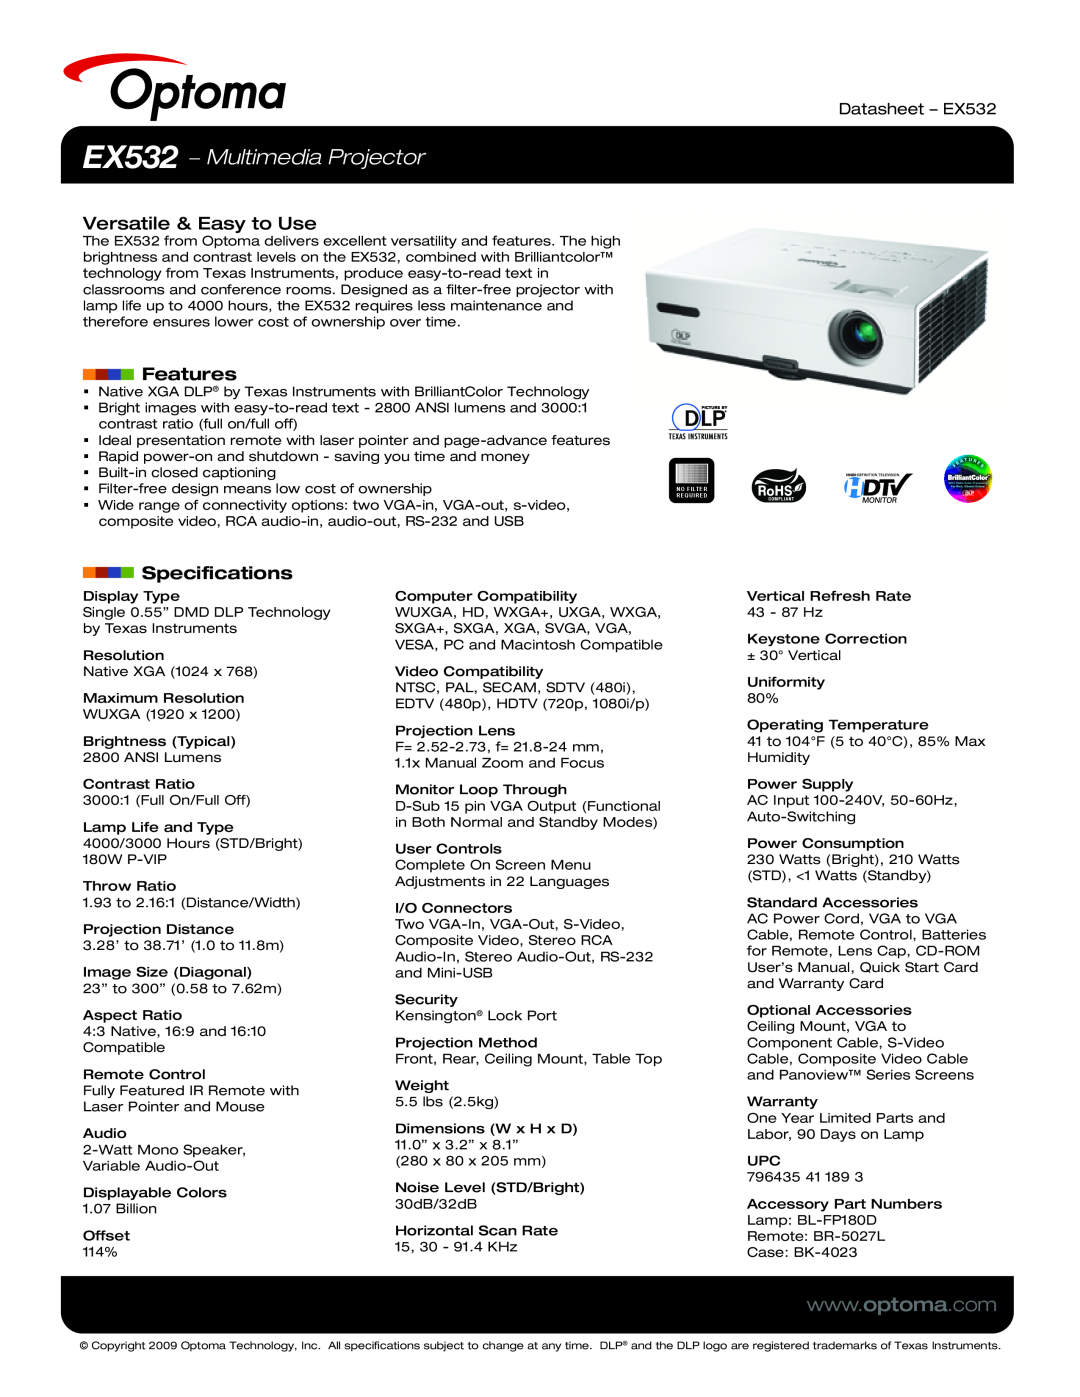 Optoma Technology specifications EX532 − Multimedia Projector, Versatile & Easy to Use, Features, Specifications 